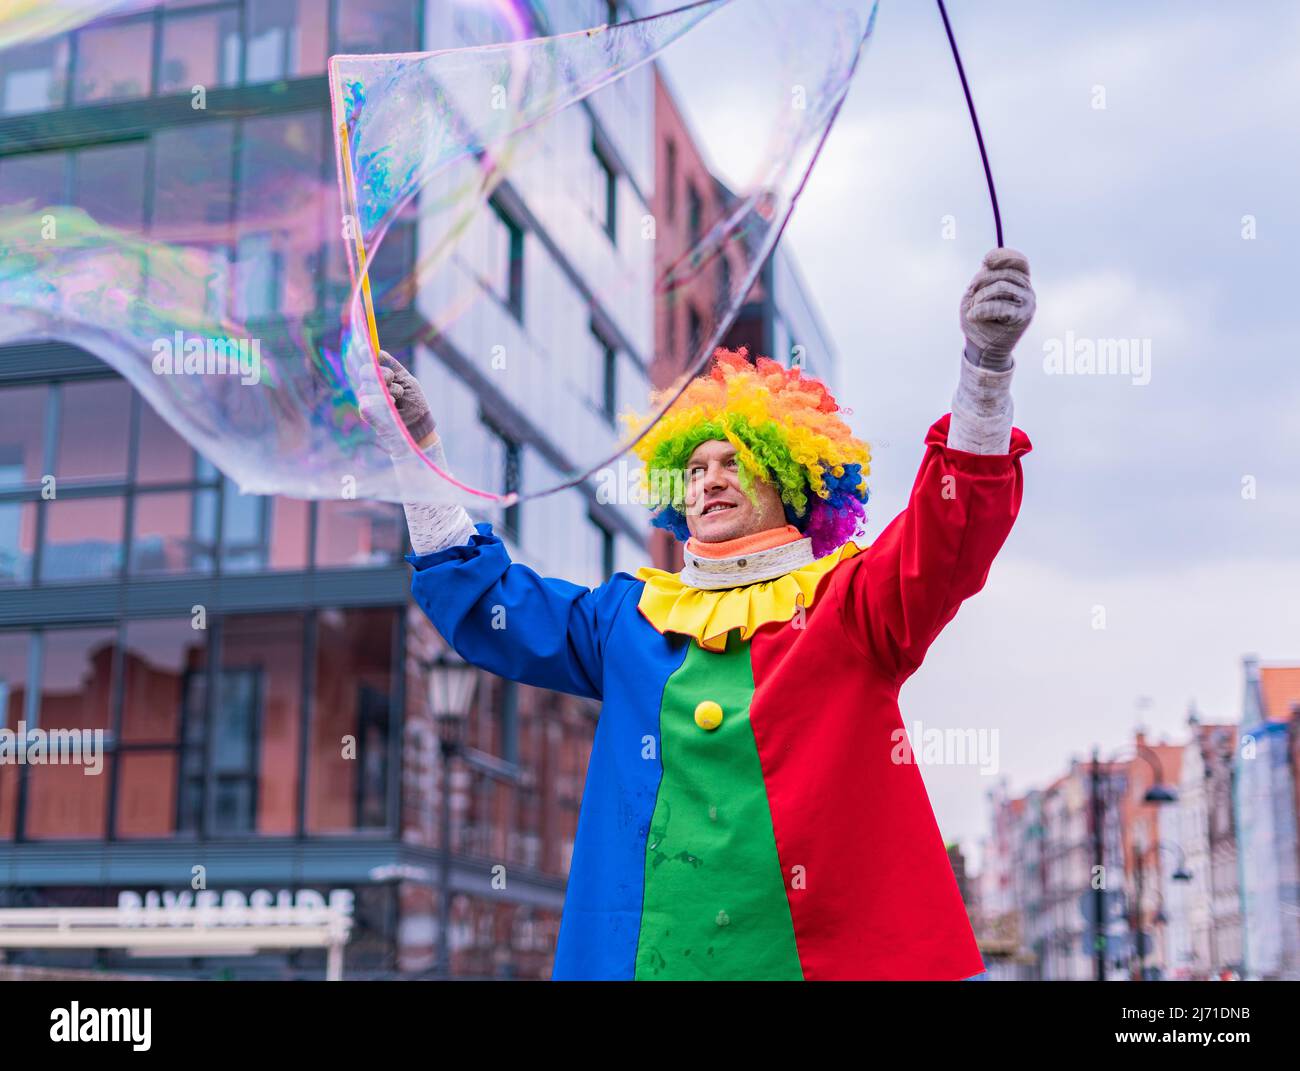 Gdansk,PL-16 Mar 22: Clown creating huge and bright soap bubbles in the air. Colorful clown providing entertainment for passing through people on the Stock Photo